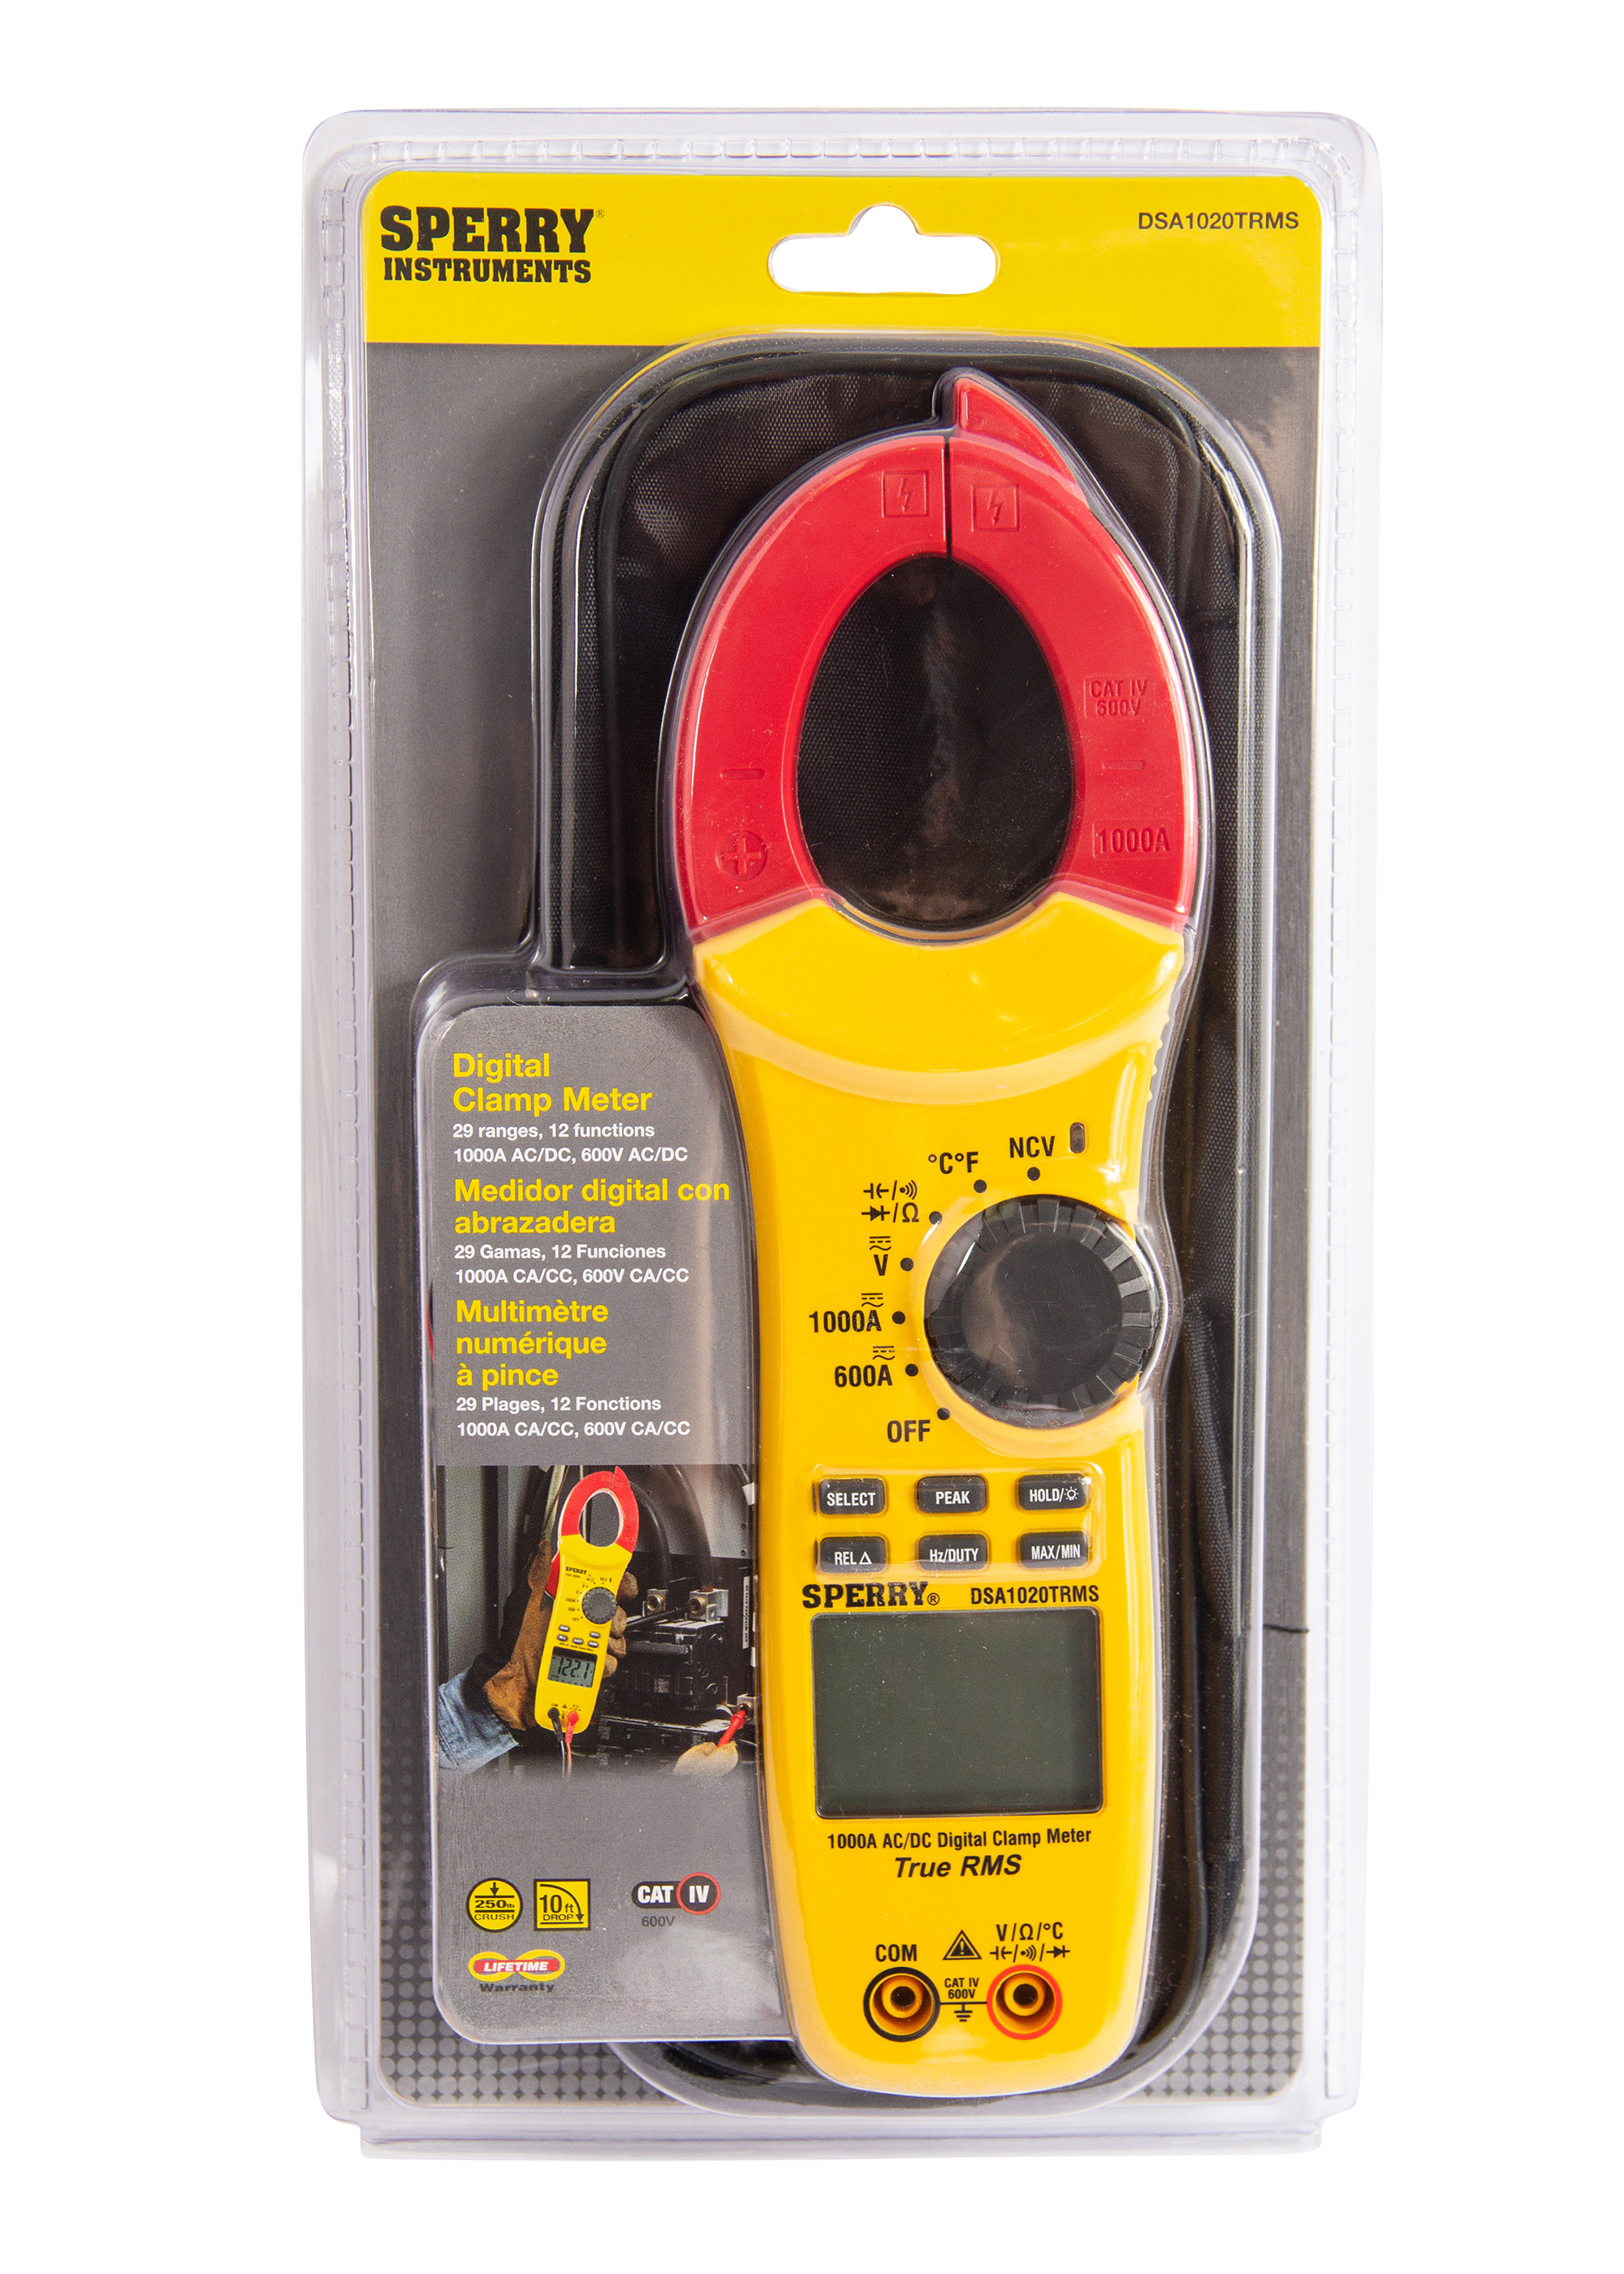 Sperry Instruments Digital Snap-Around Clamp Meter (True RMS)Sperry Instruments Digital Snap-Around Clamp Meter (True RMS) from Columbia Safety